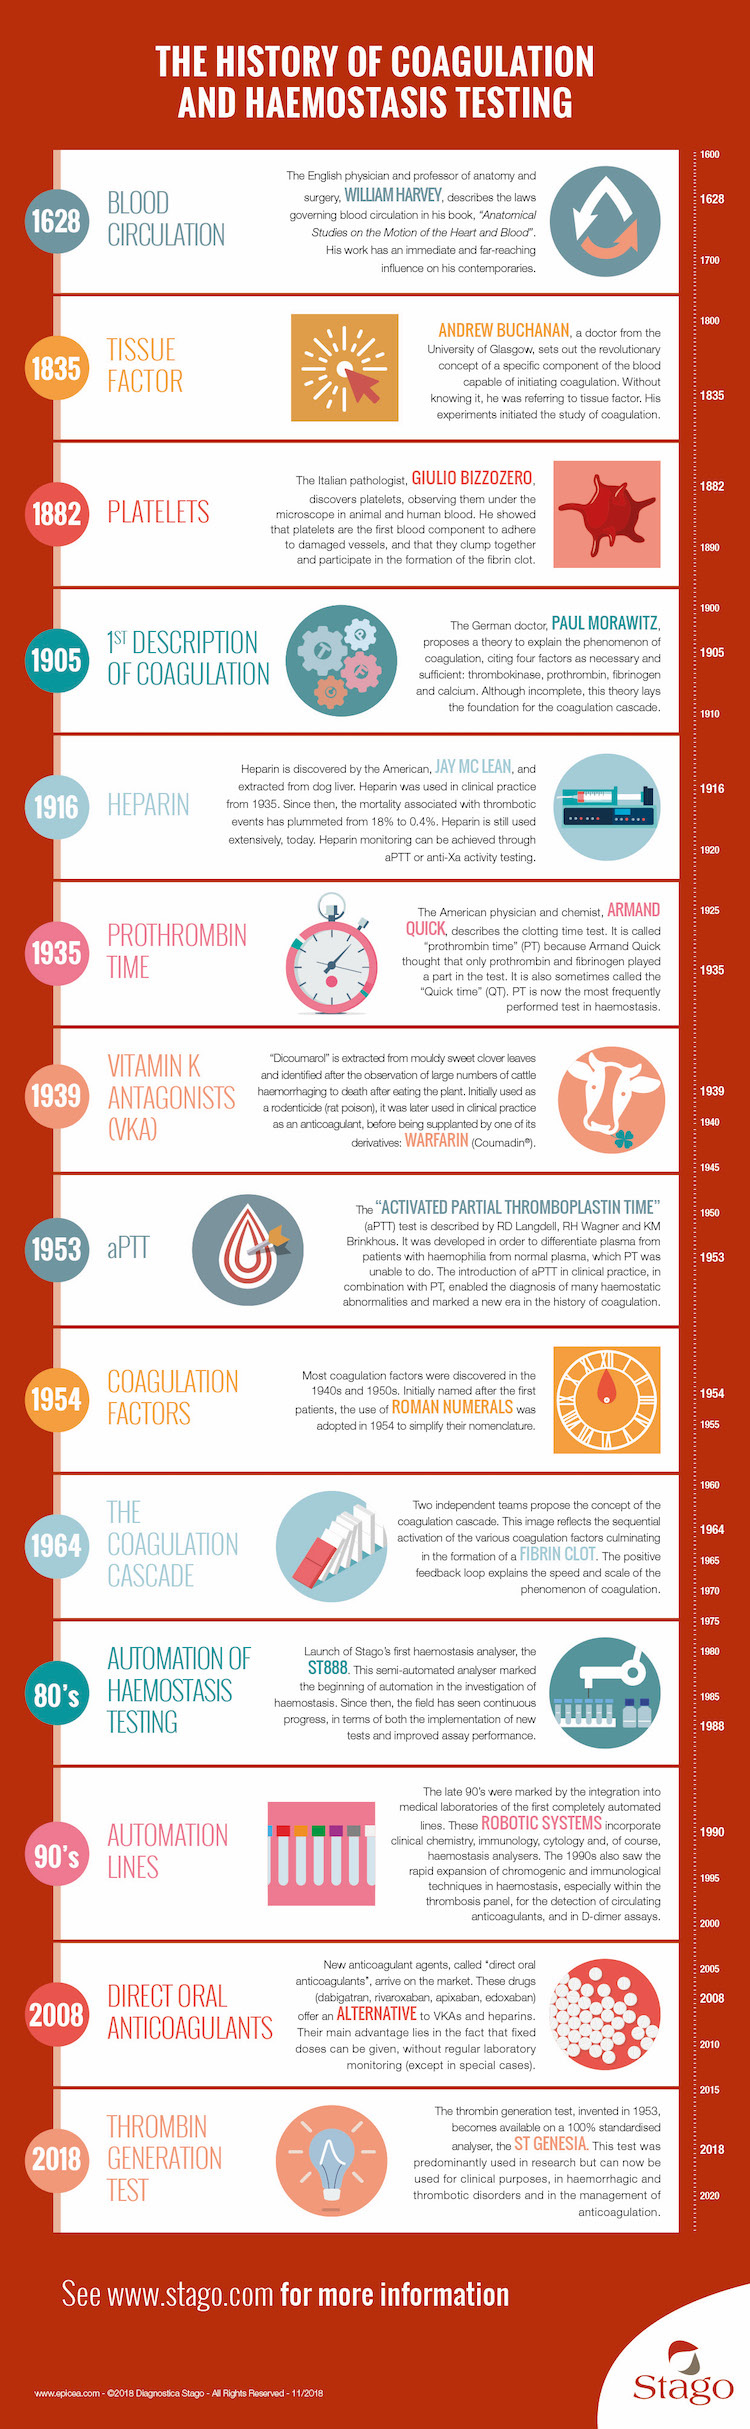 History of Coagulation: infographic from 1628 to the present day 